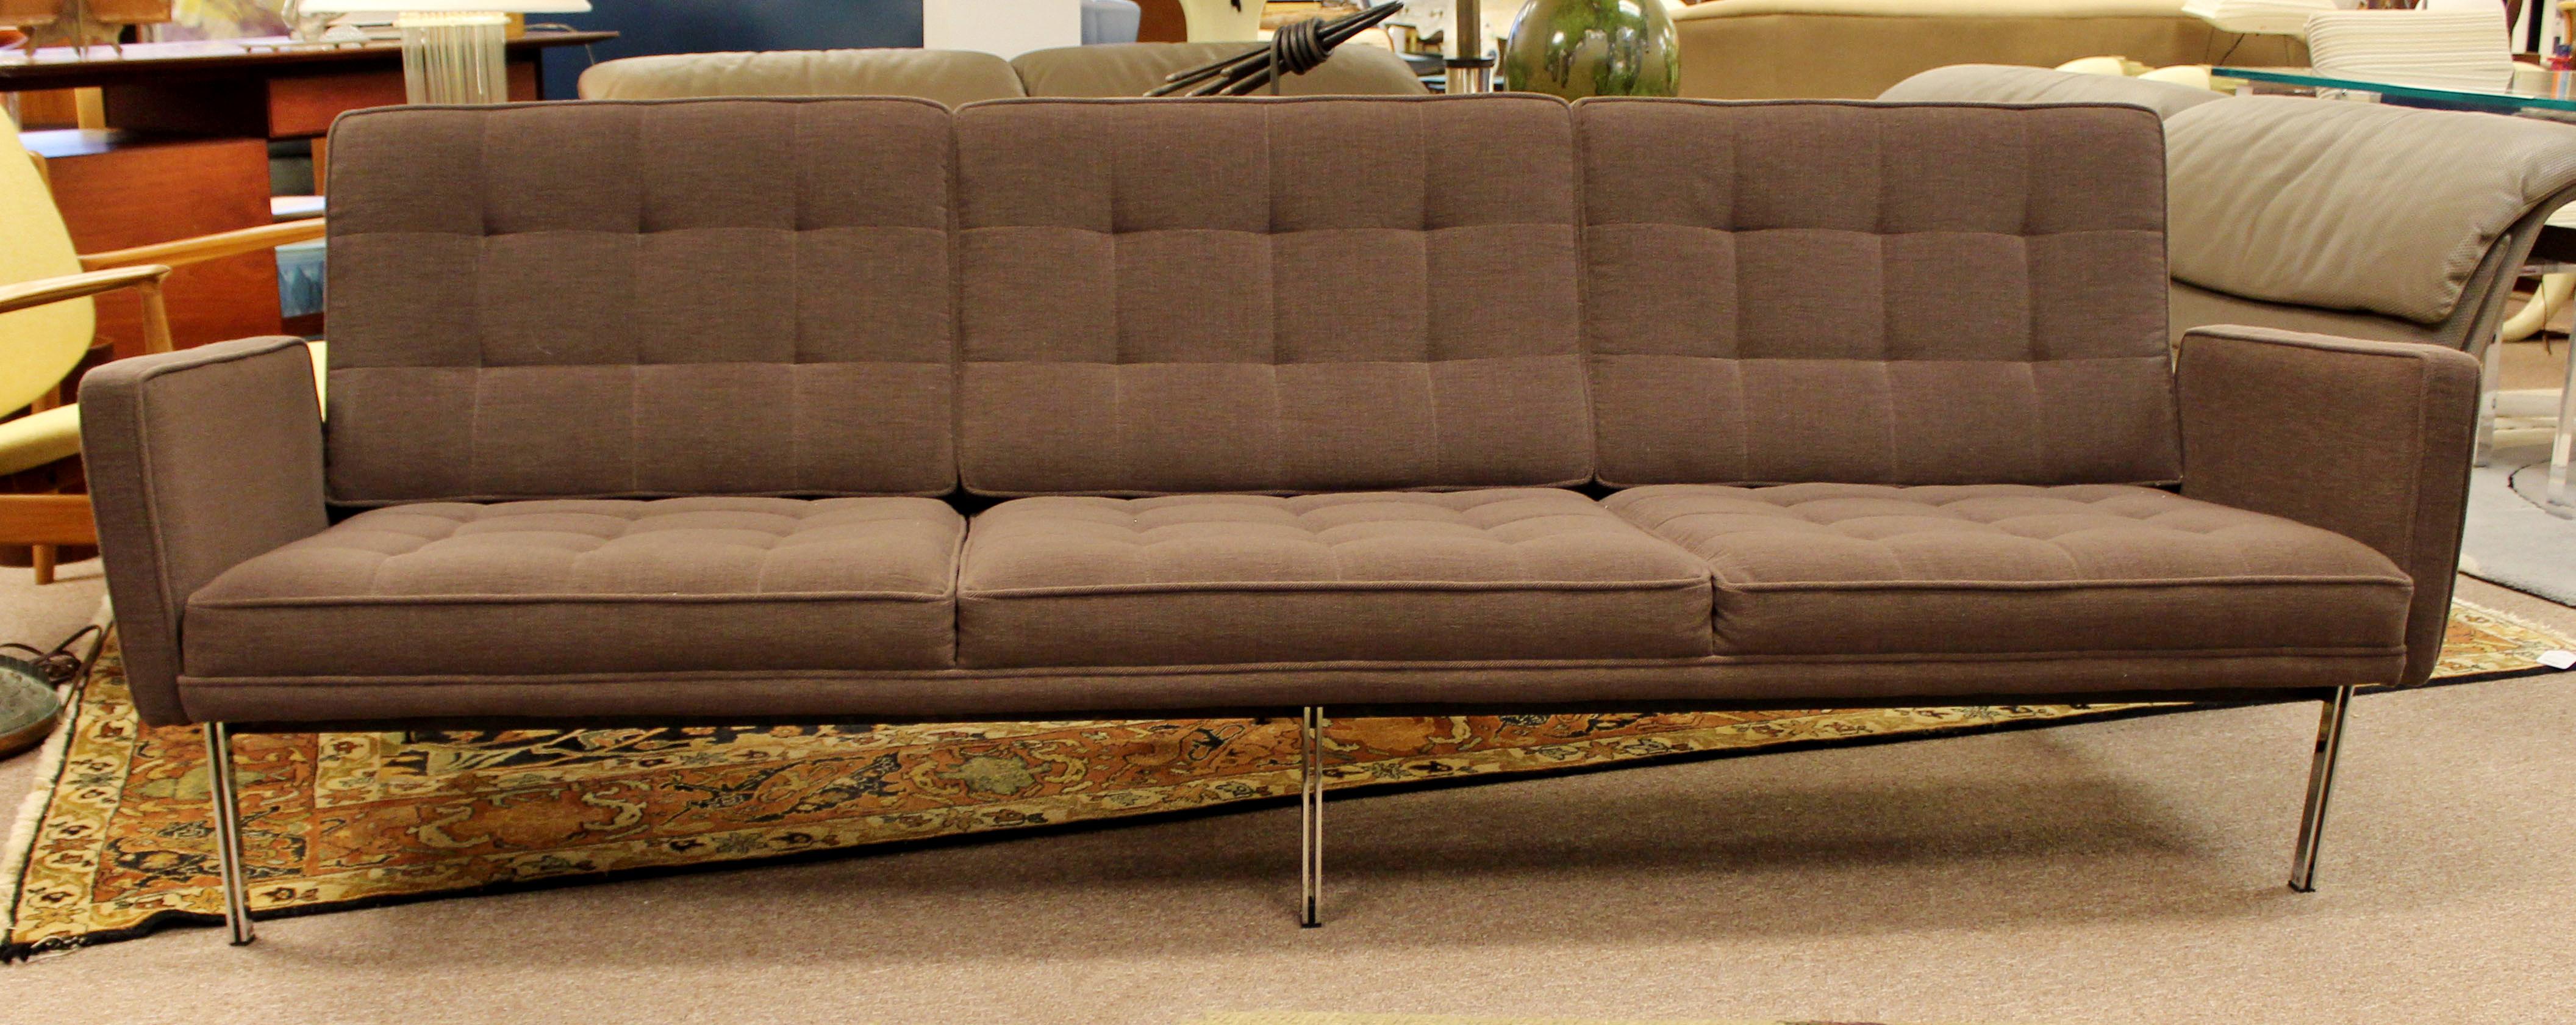 For your consideration is a rare, early edition, circa 1950s, of the parallel bar sofa by Florence Knoll. Recently professionally reupholstered in a tufted brown wool frise fabric by Holly Hunt. In excellent condition. The dimensions are 90.5